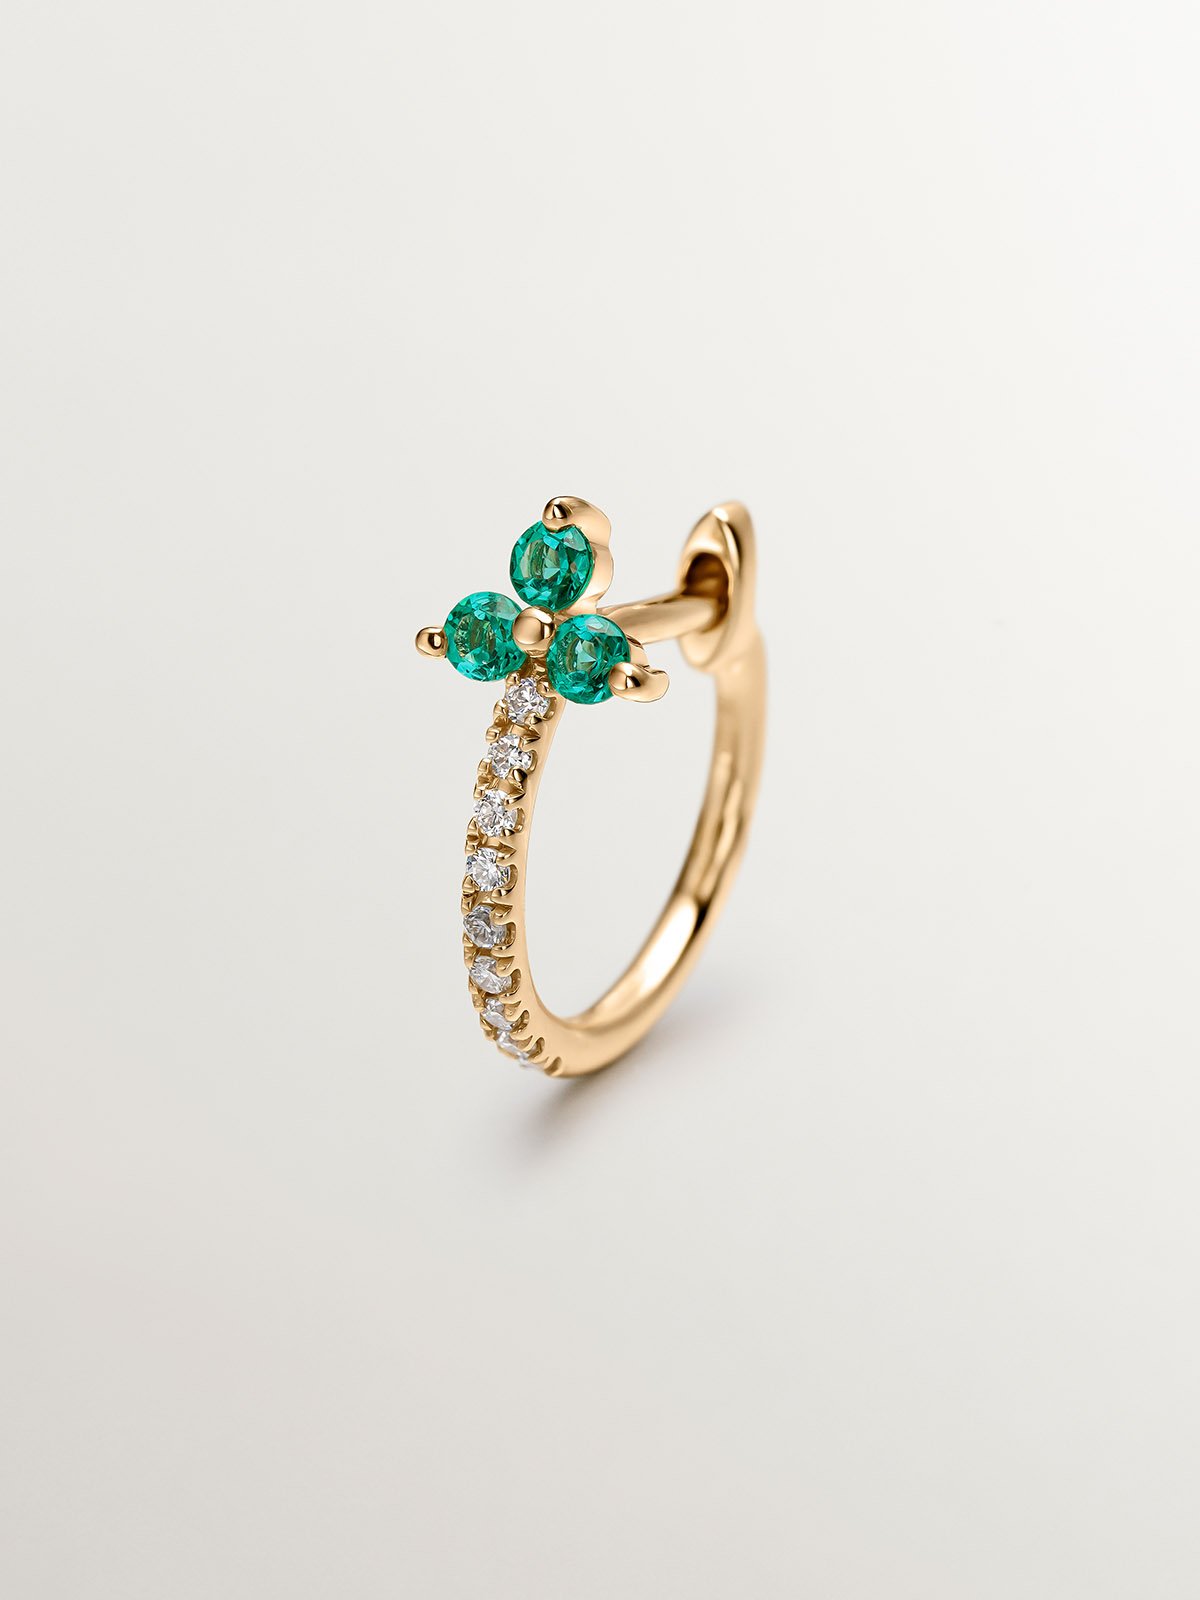 Individual 9K yellow gold earring with diamonds and emeralds.